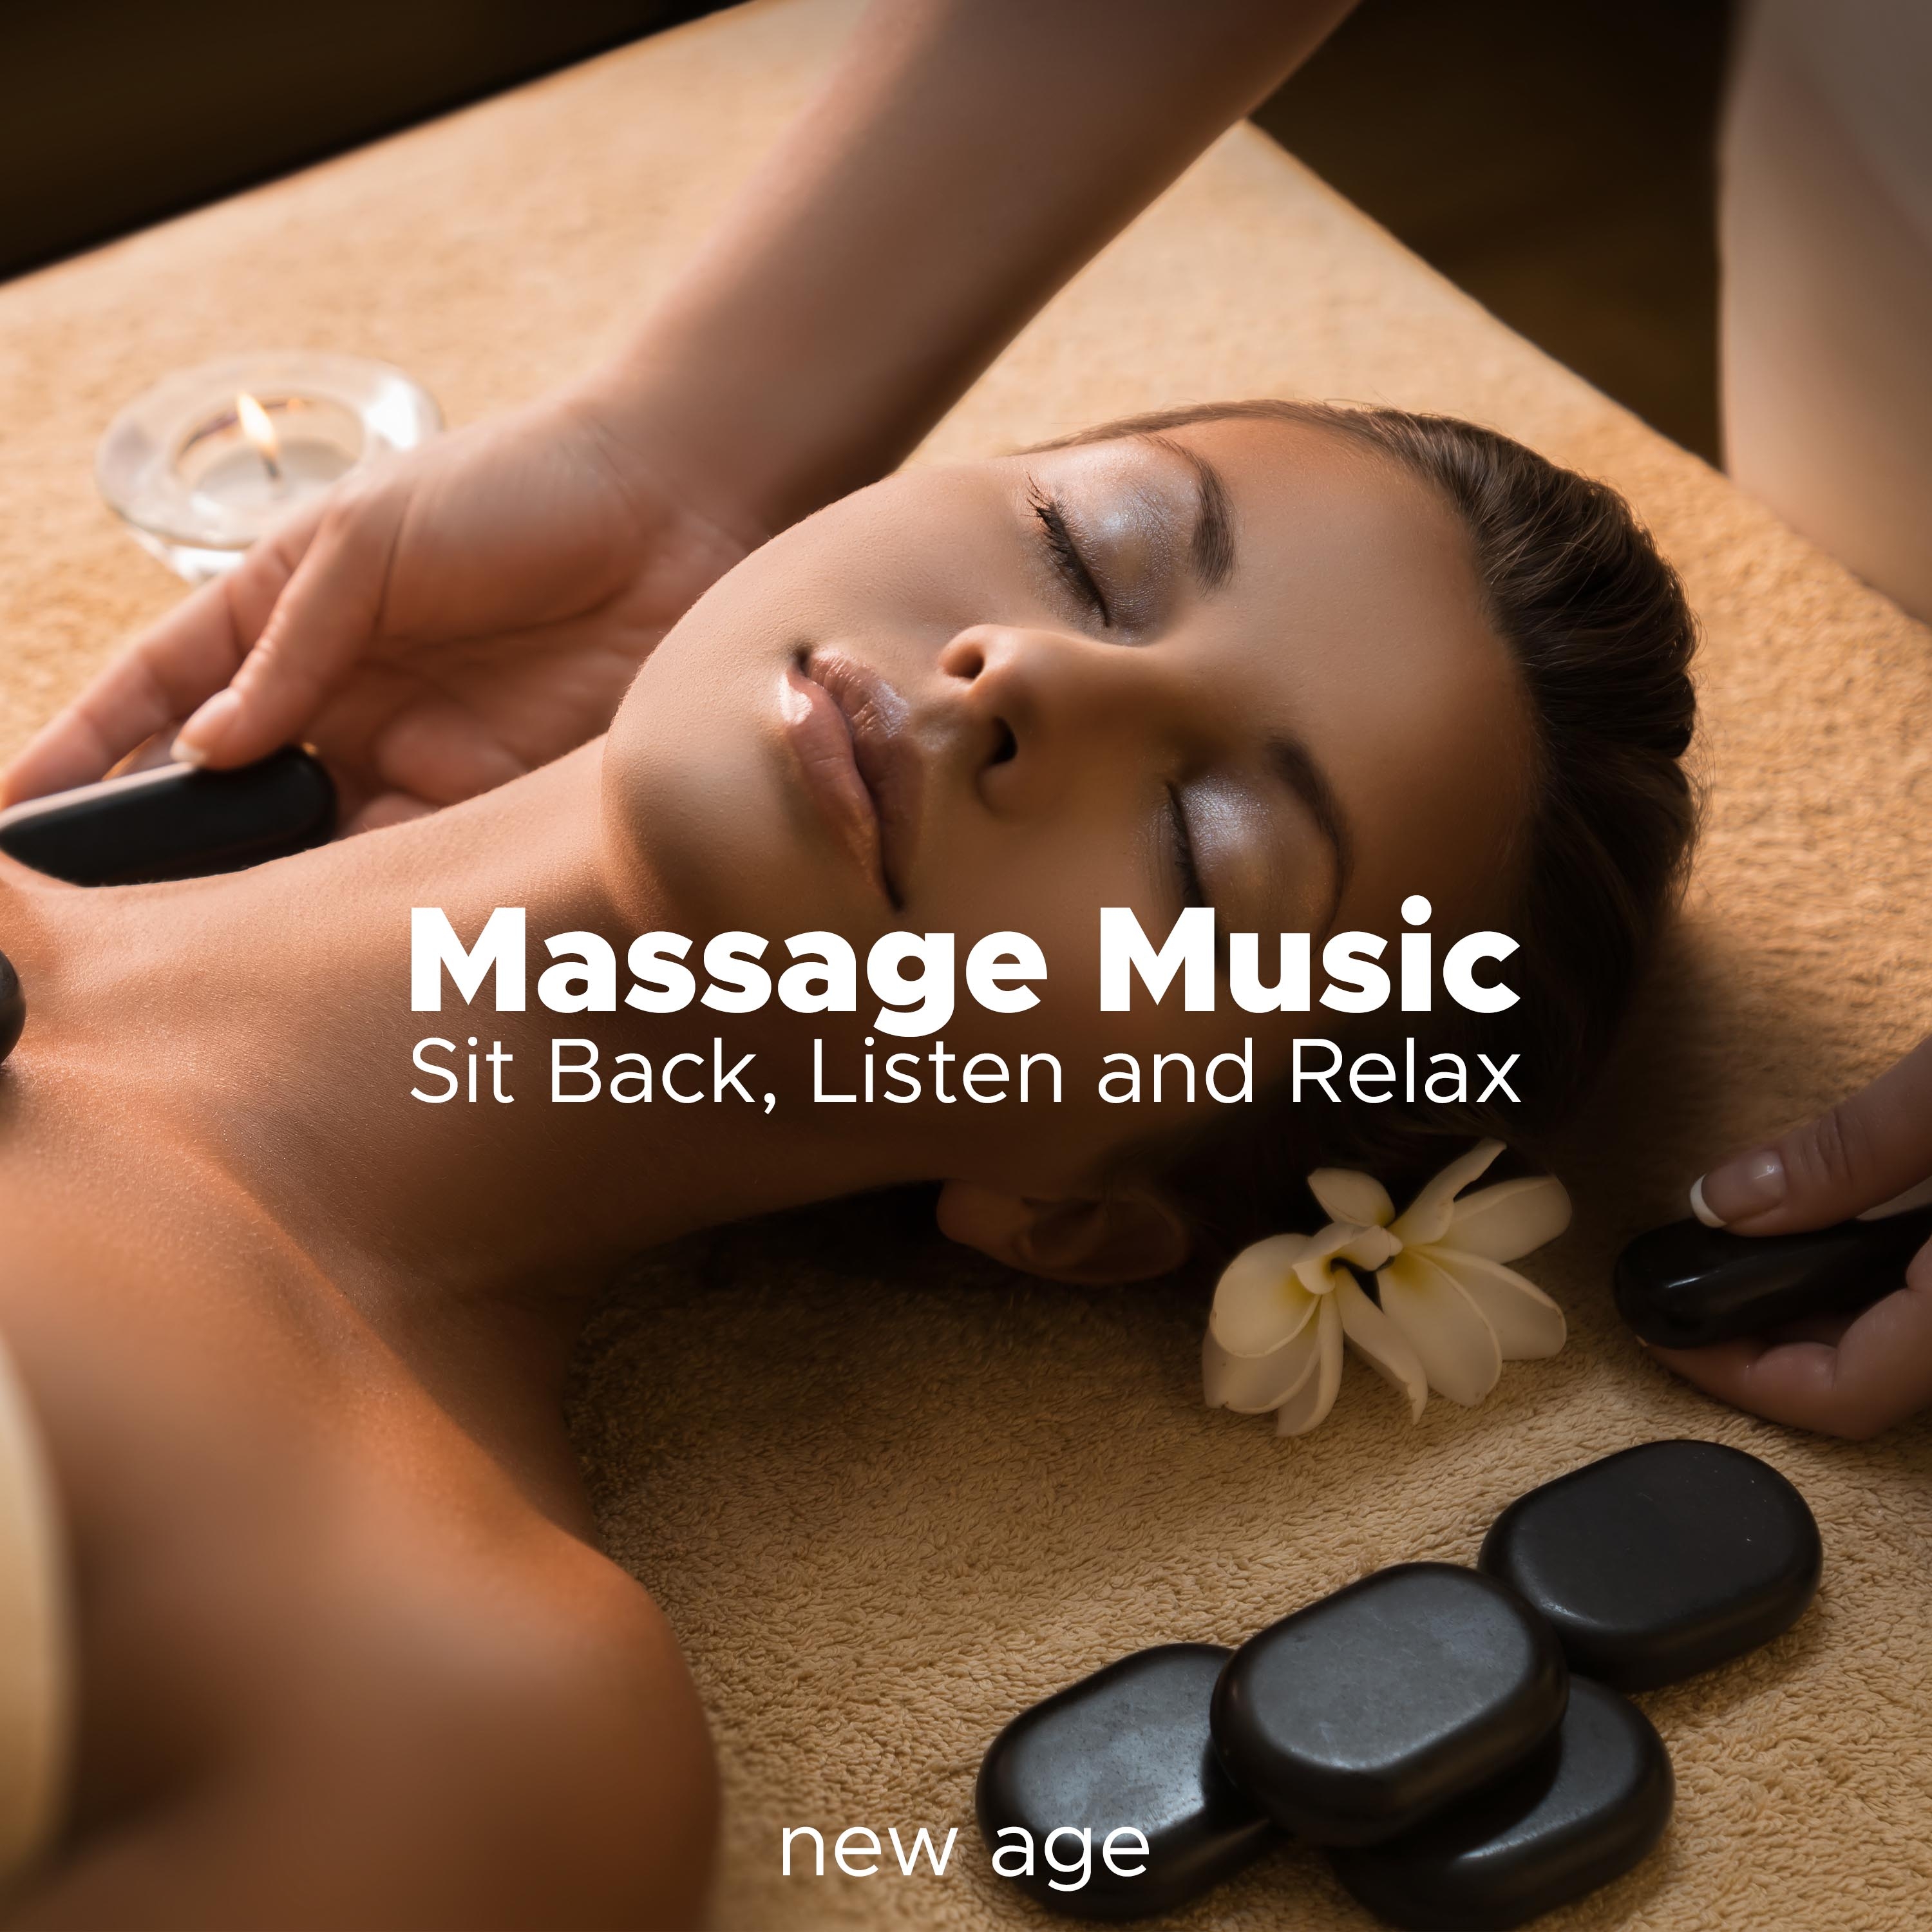 Massage Music: Sit Back, Listen and Relax, Relaxation Music, Meditation, Sleep, Reflections with Nature Sounds